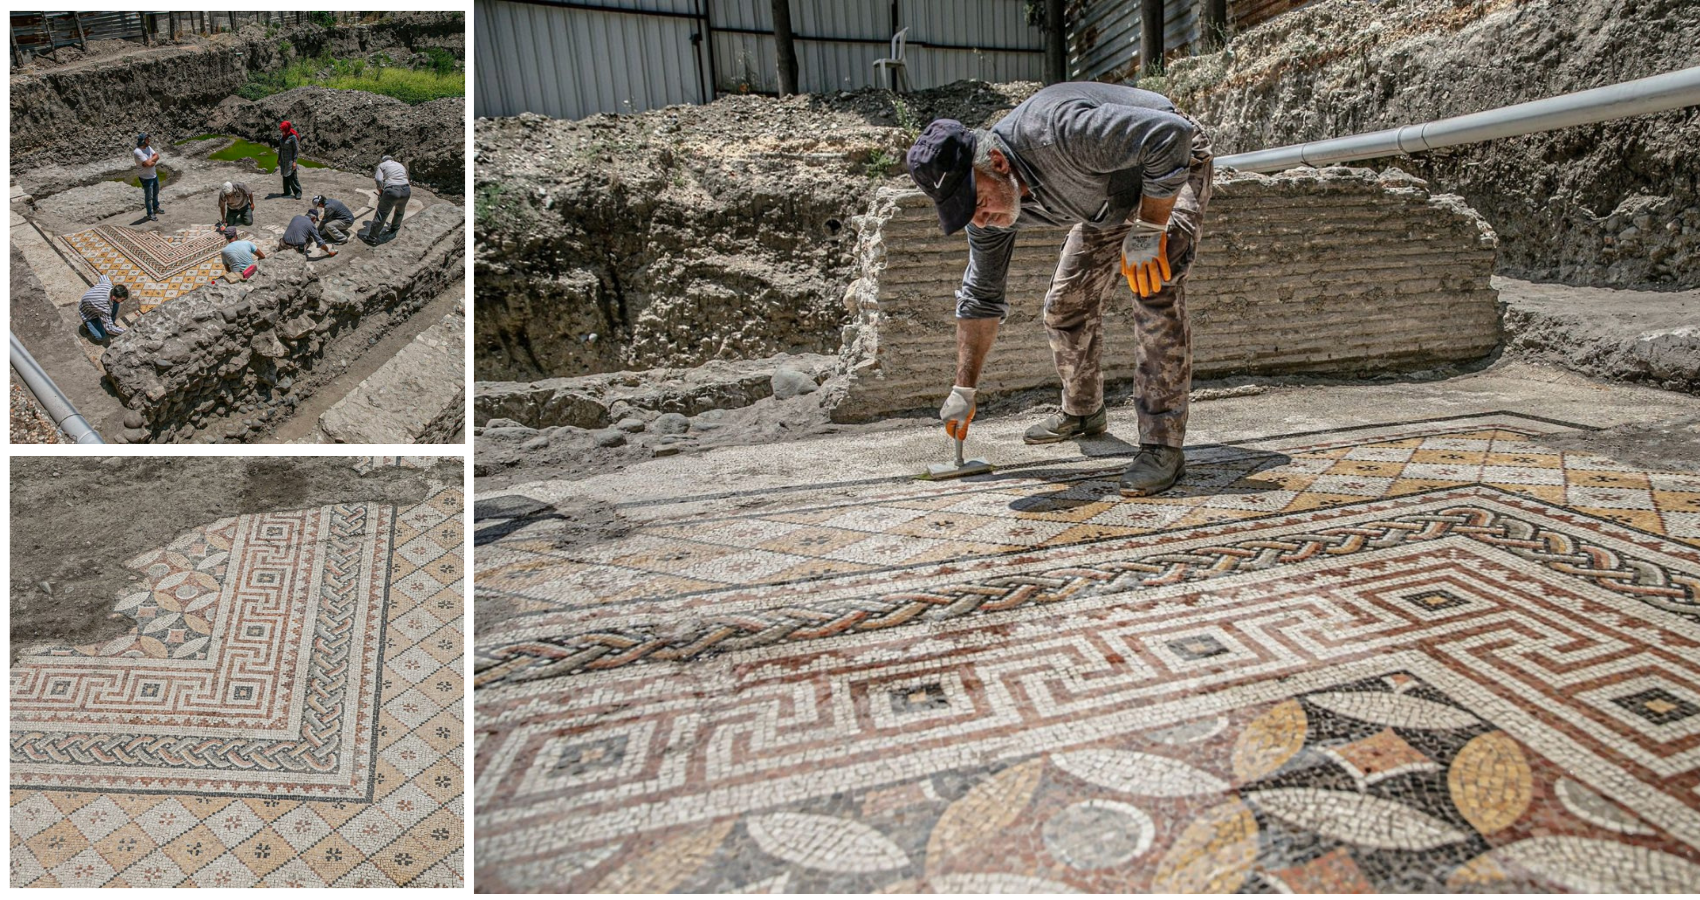 In southern Turkey, the remains of a Roman villa whose floor was decorated with geometrically patterned mosaics were unearthed during construction